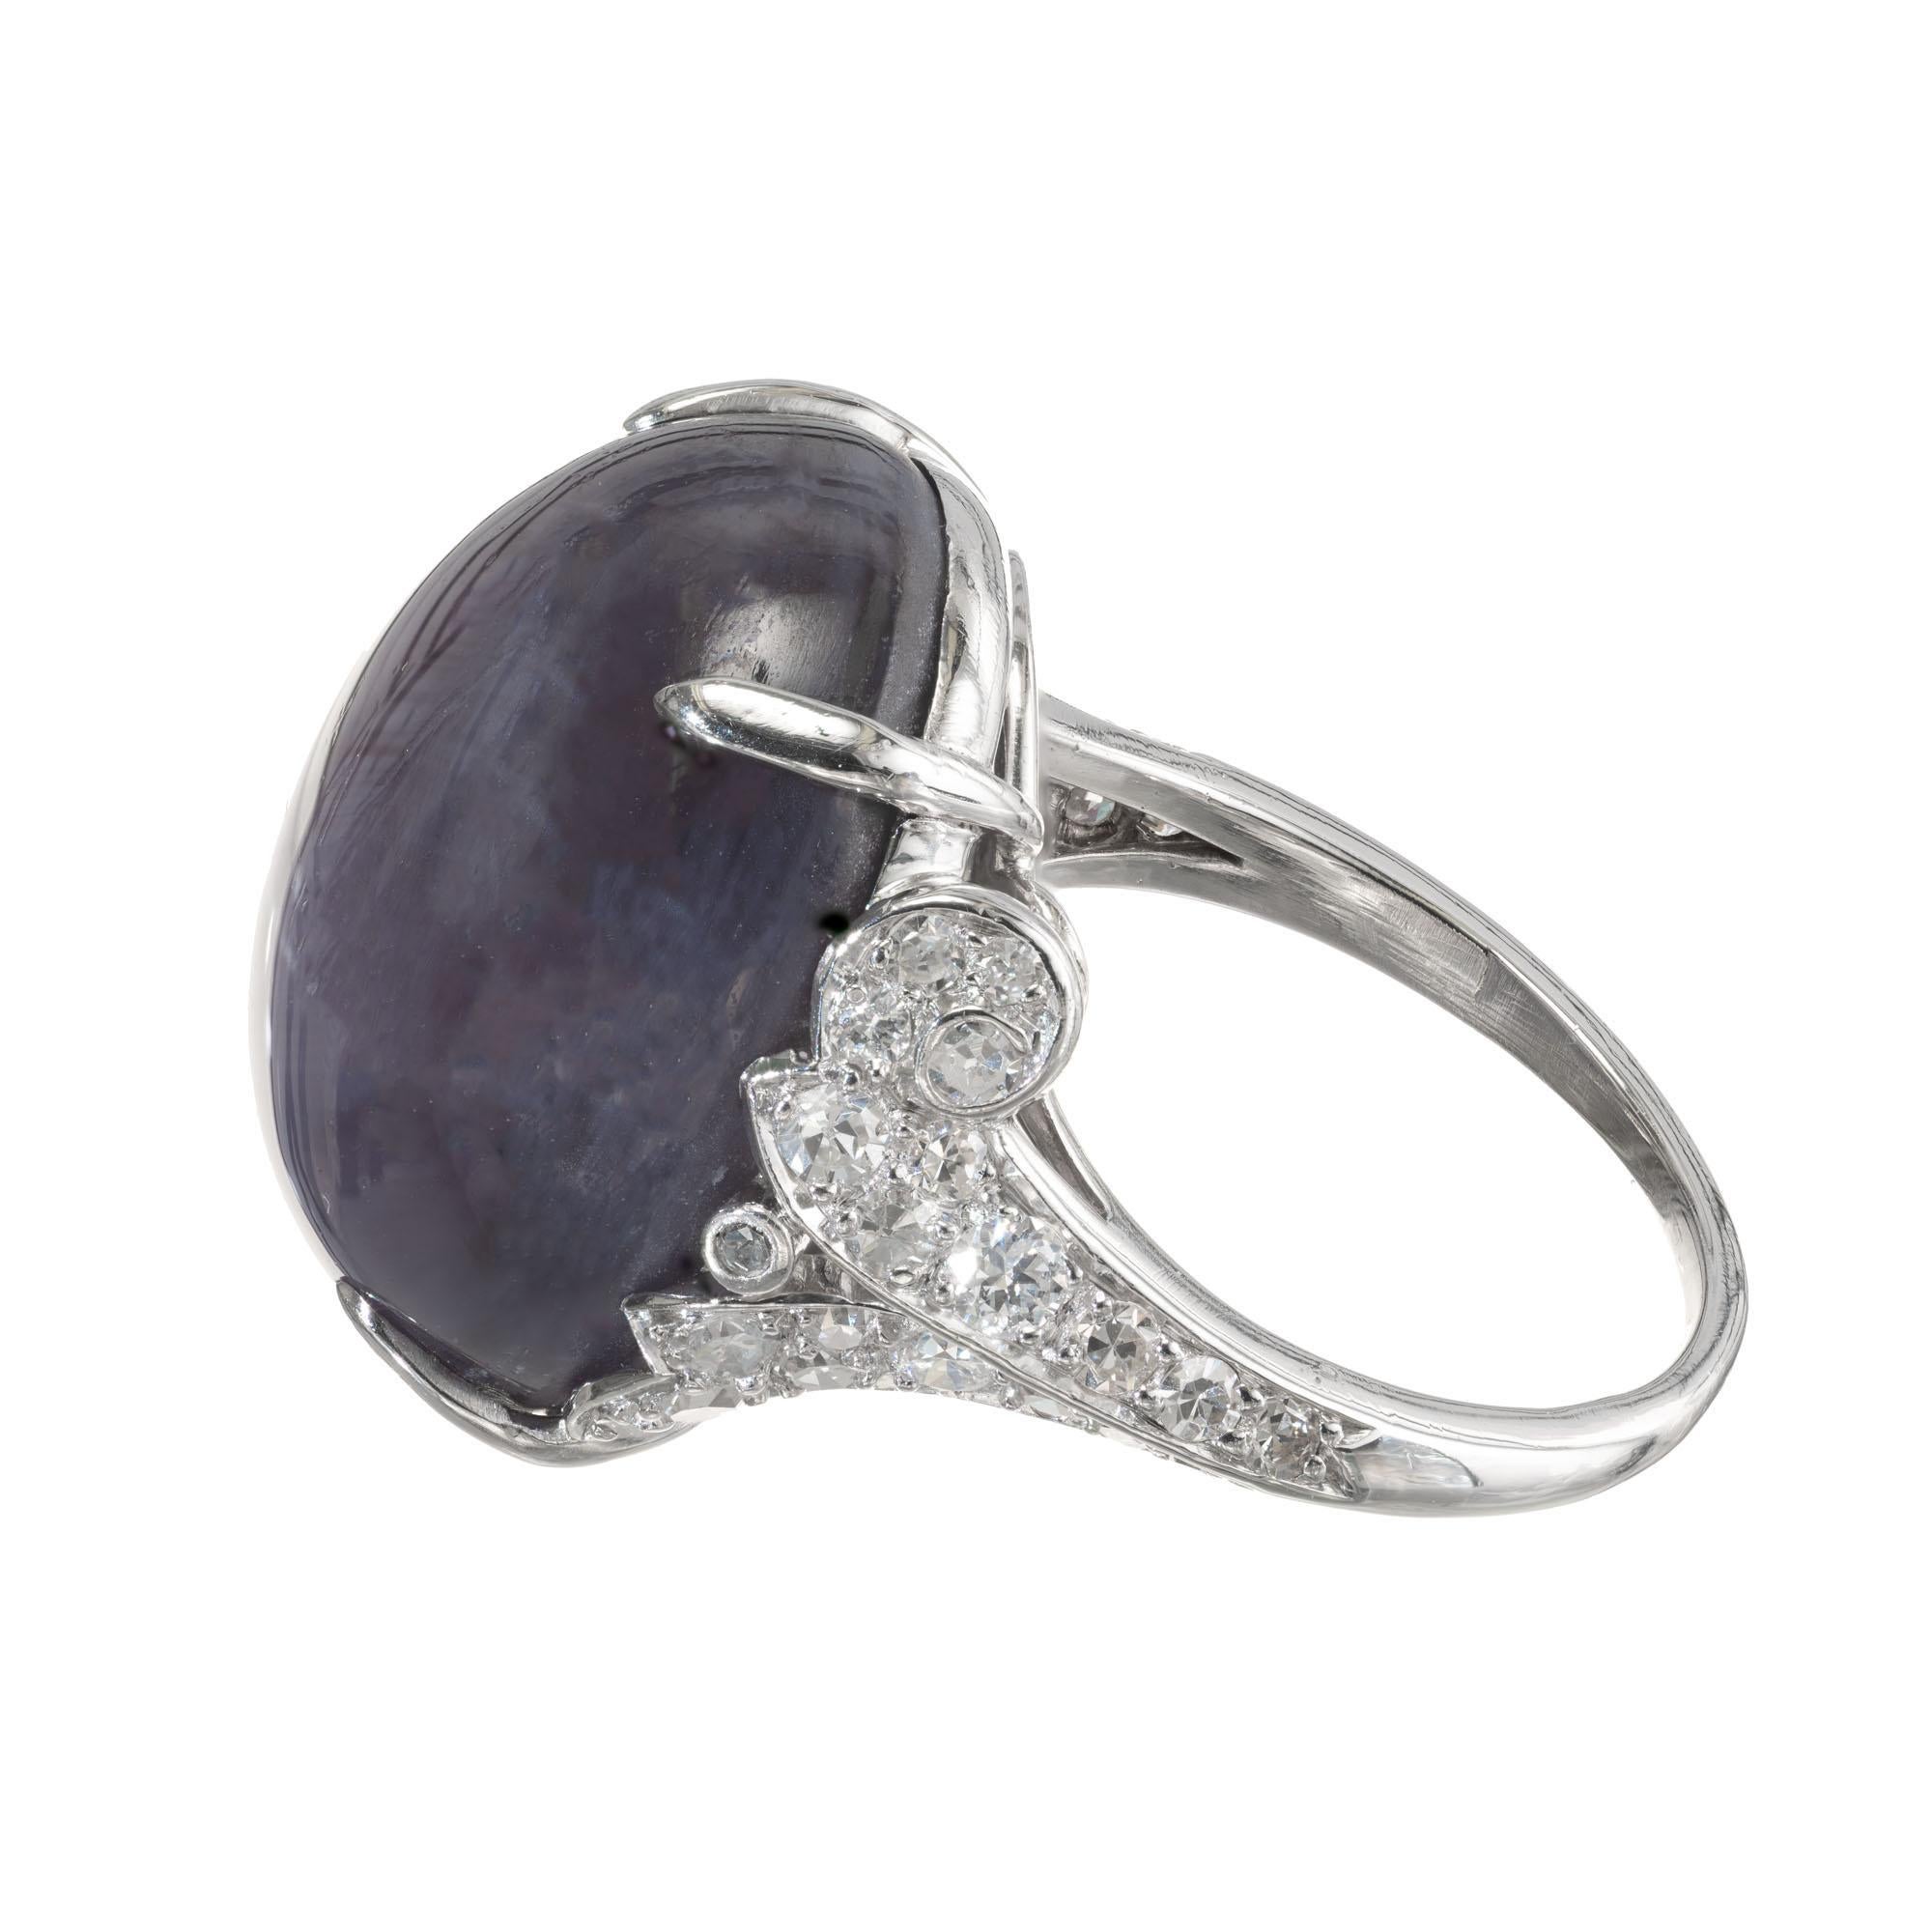 Oval Cut GIA Certified 30.37 Carat Oval Cabochon Star Sapphire Diamond Platinum Ring For Sale